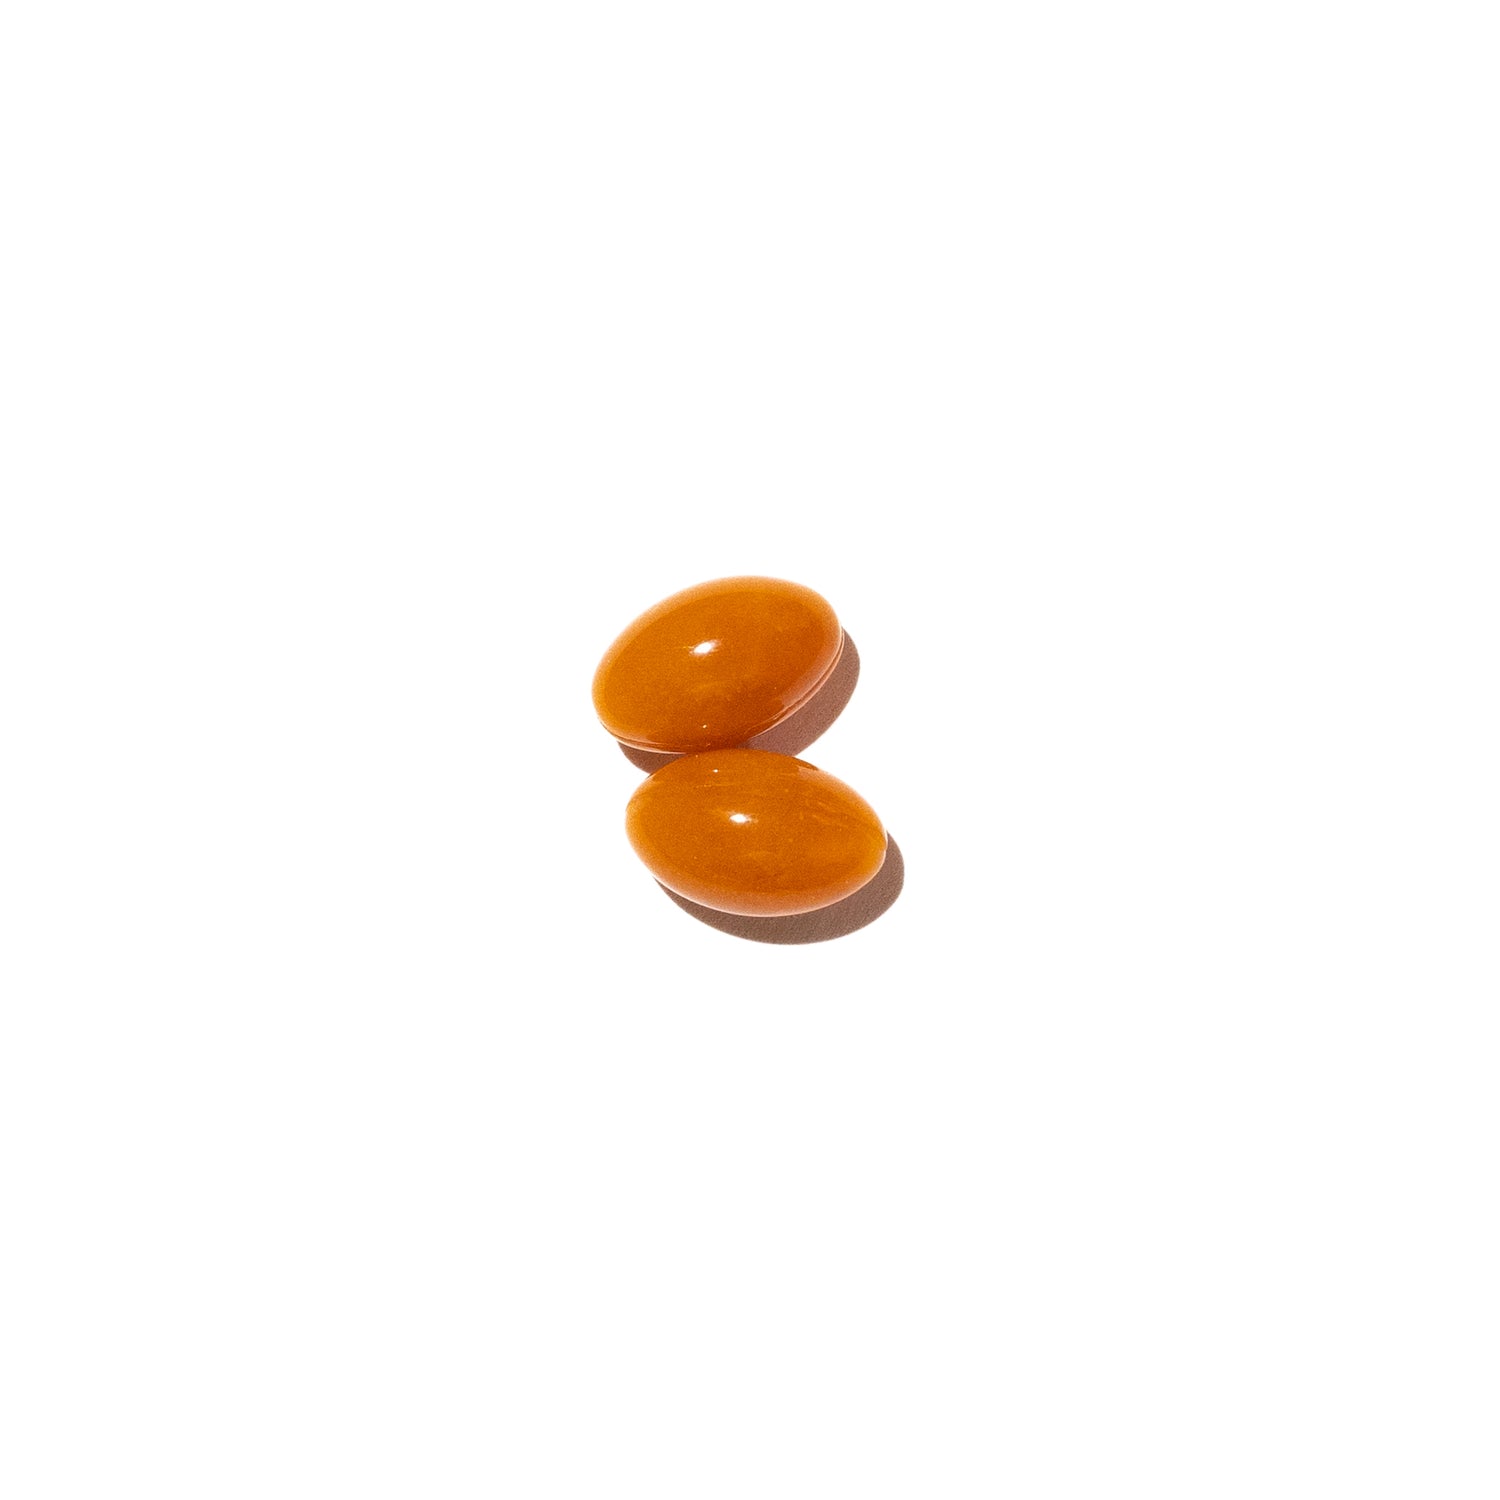 Two orange recovery-pills on a white background.